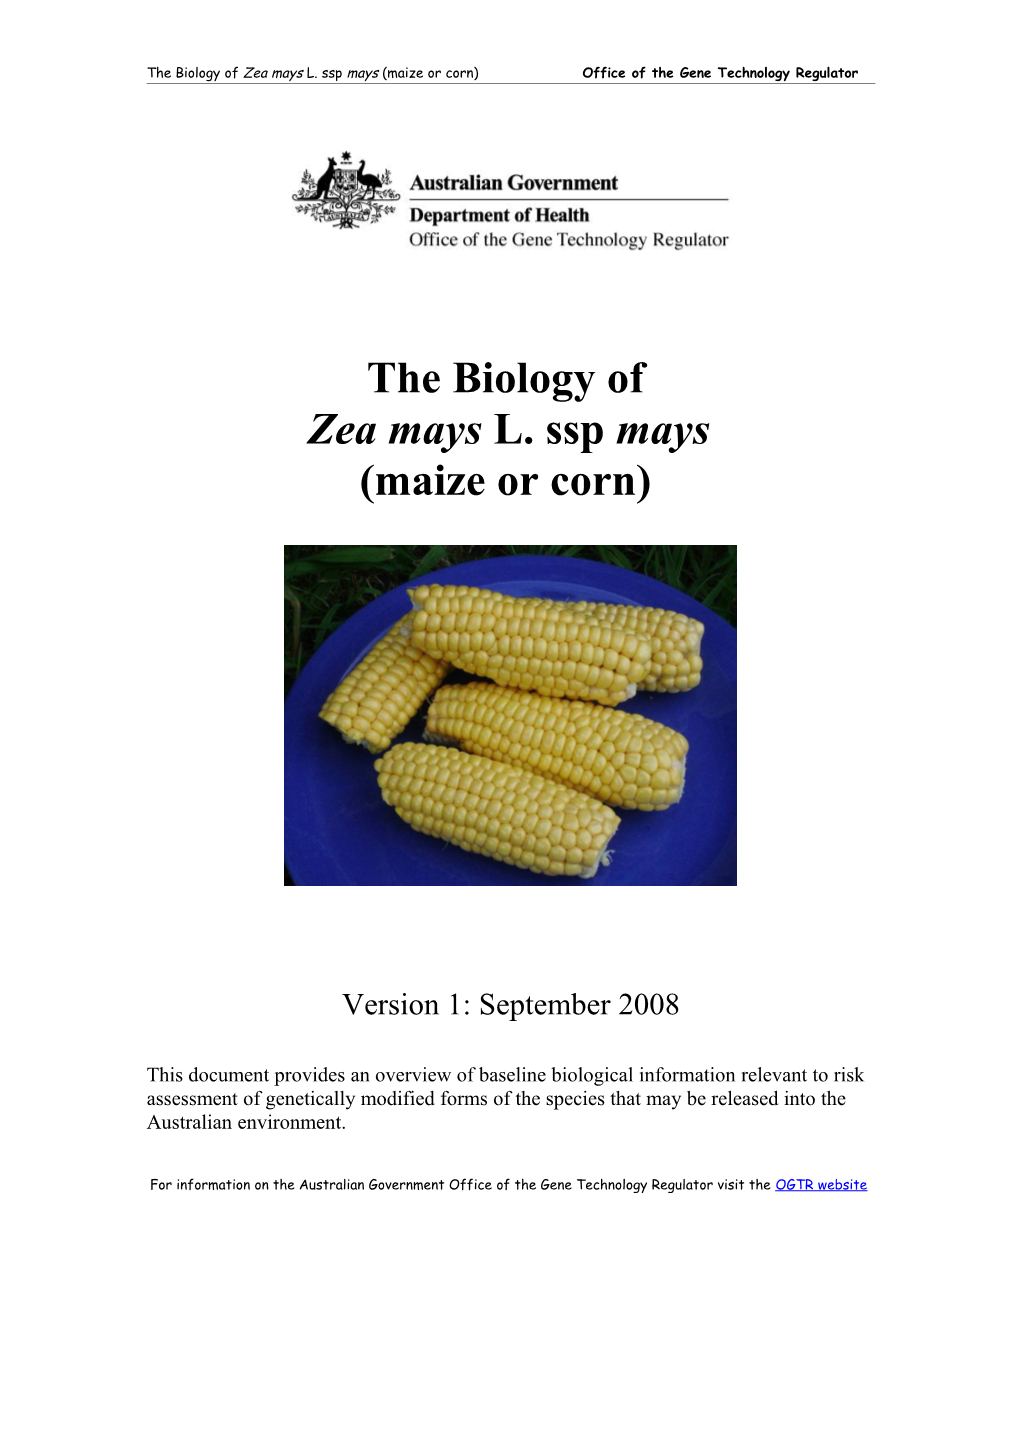 The Biology of Zea Mays L. Ssp Mays (Corn Or Maize)